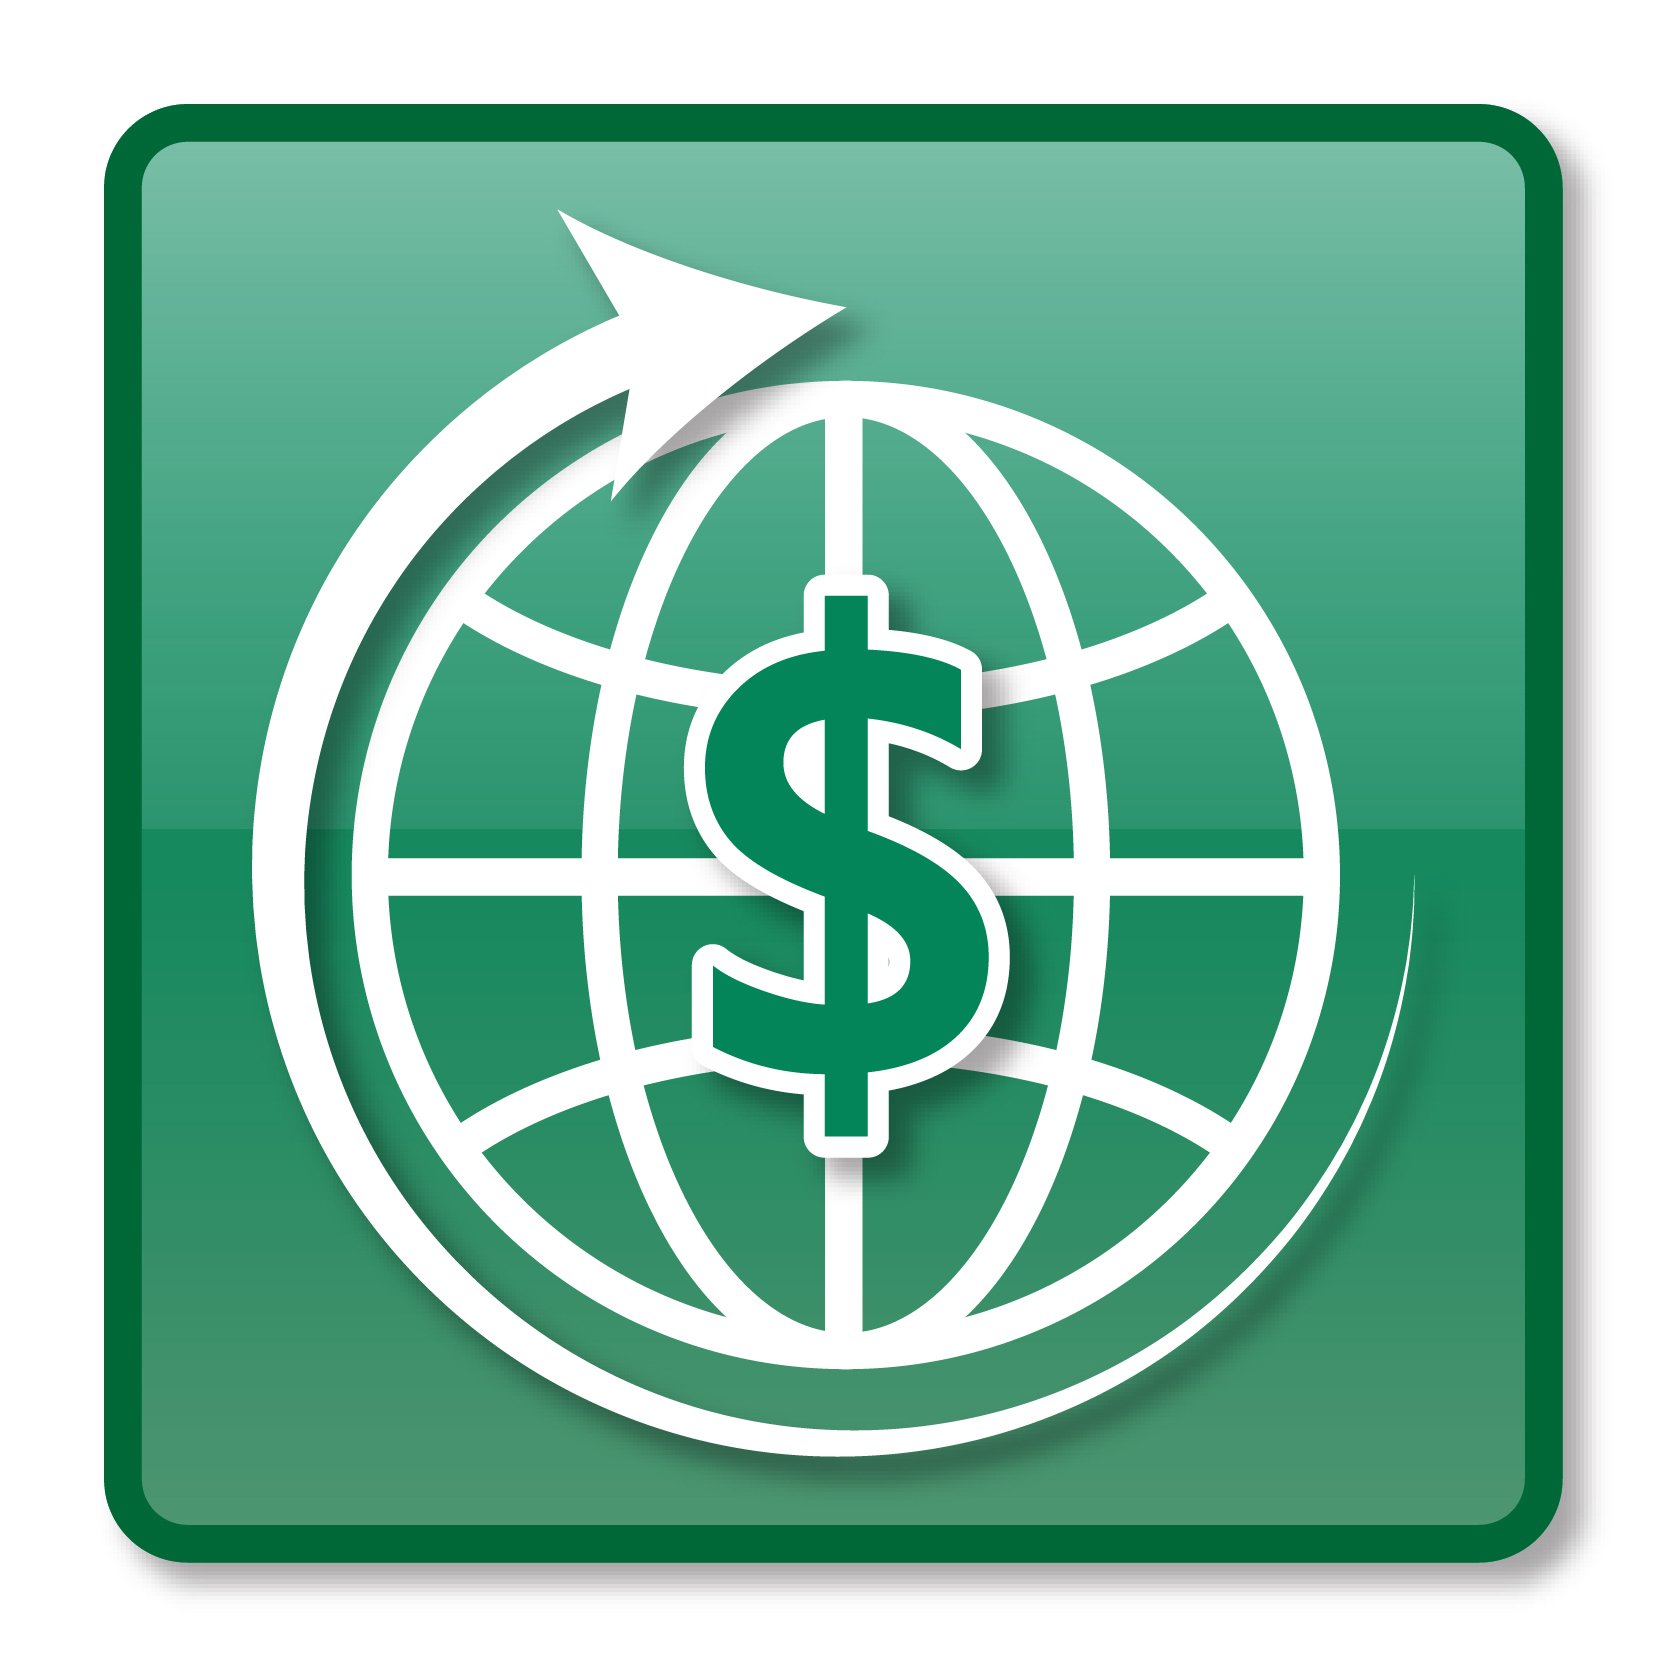 Global Financial Services